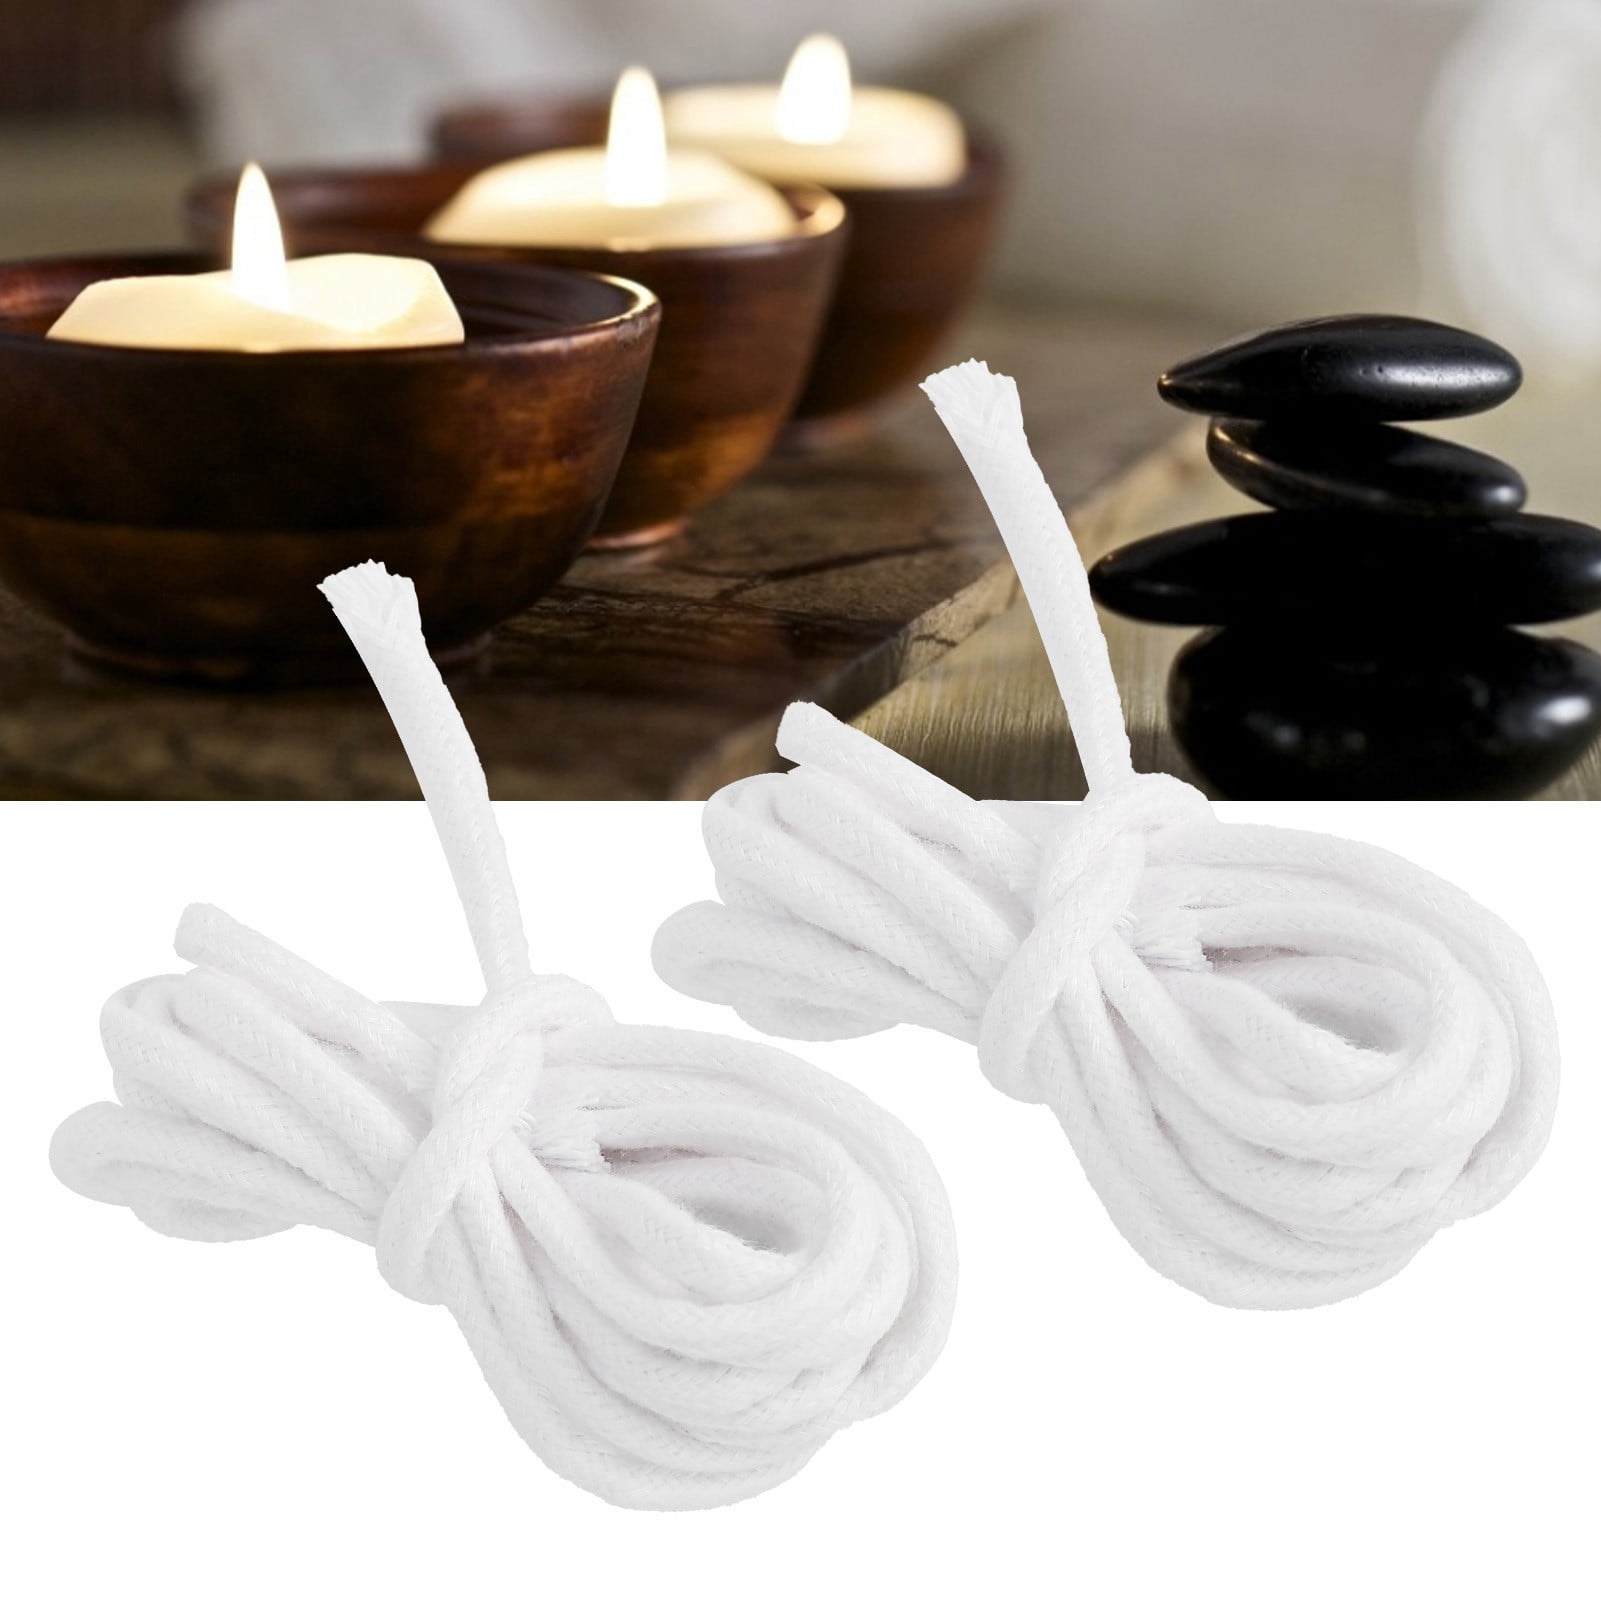 Oil Lamp Wick, Ceramic Wick Heat-Resistant Cotton Replacement 7Pcs Round  Hollow Candle Wicks For Oil Lamps And Candles For Candle Making DIY White